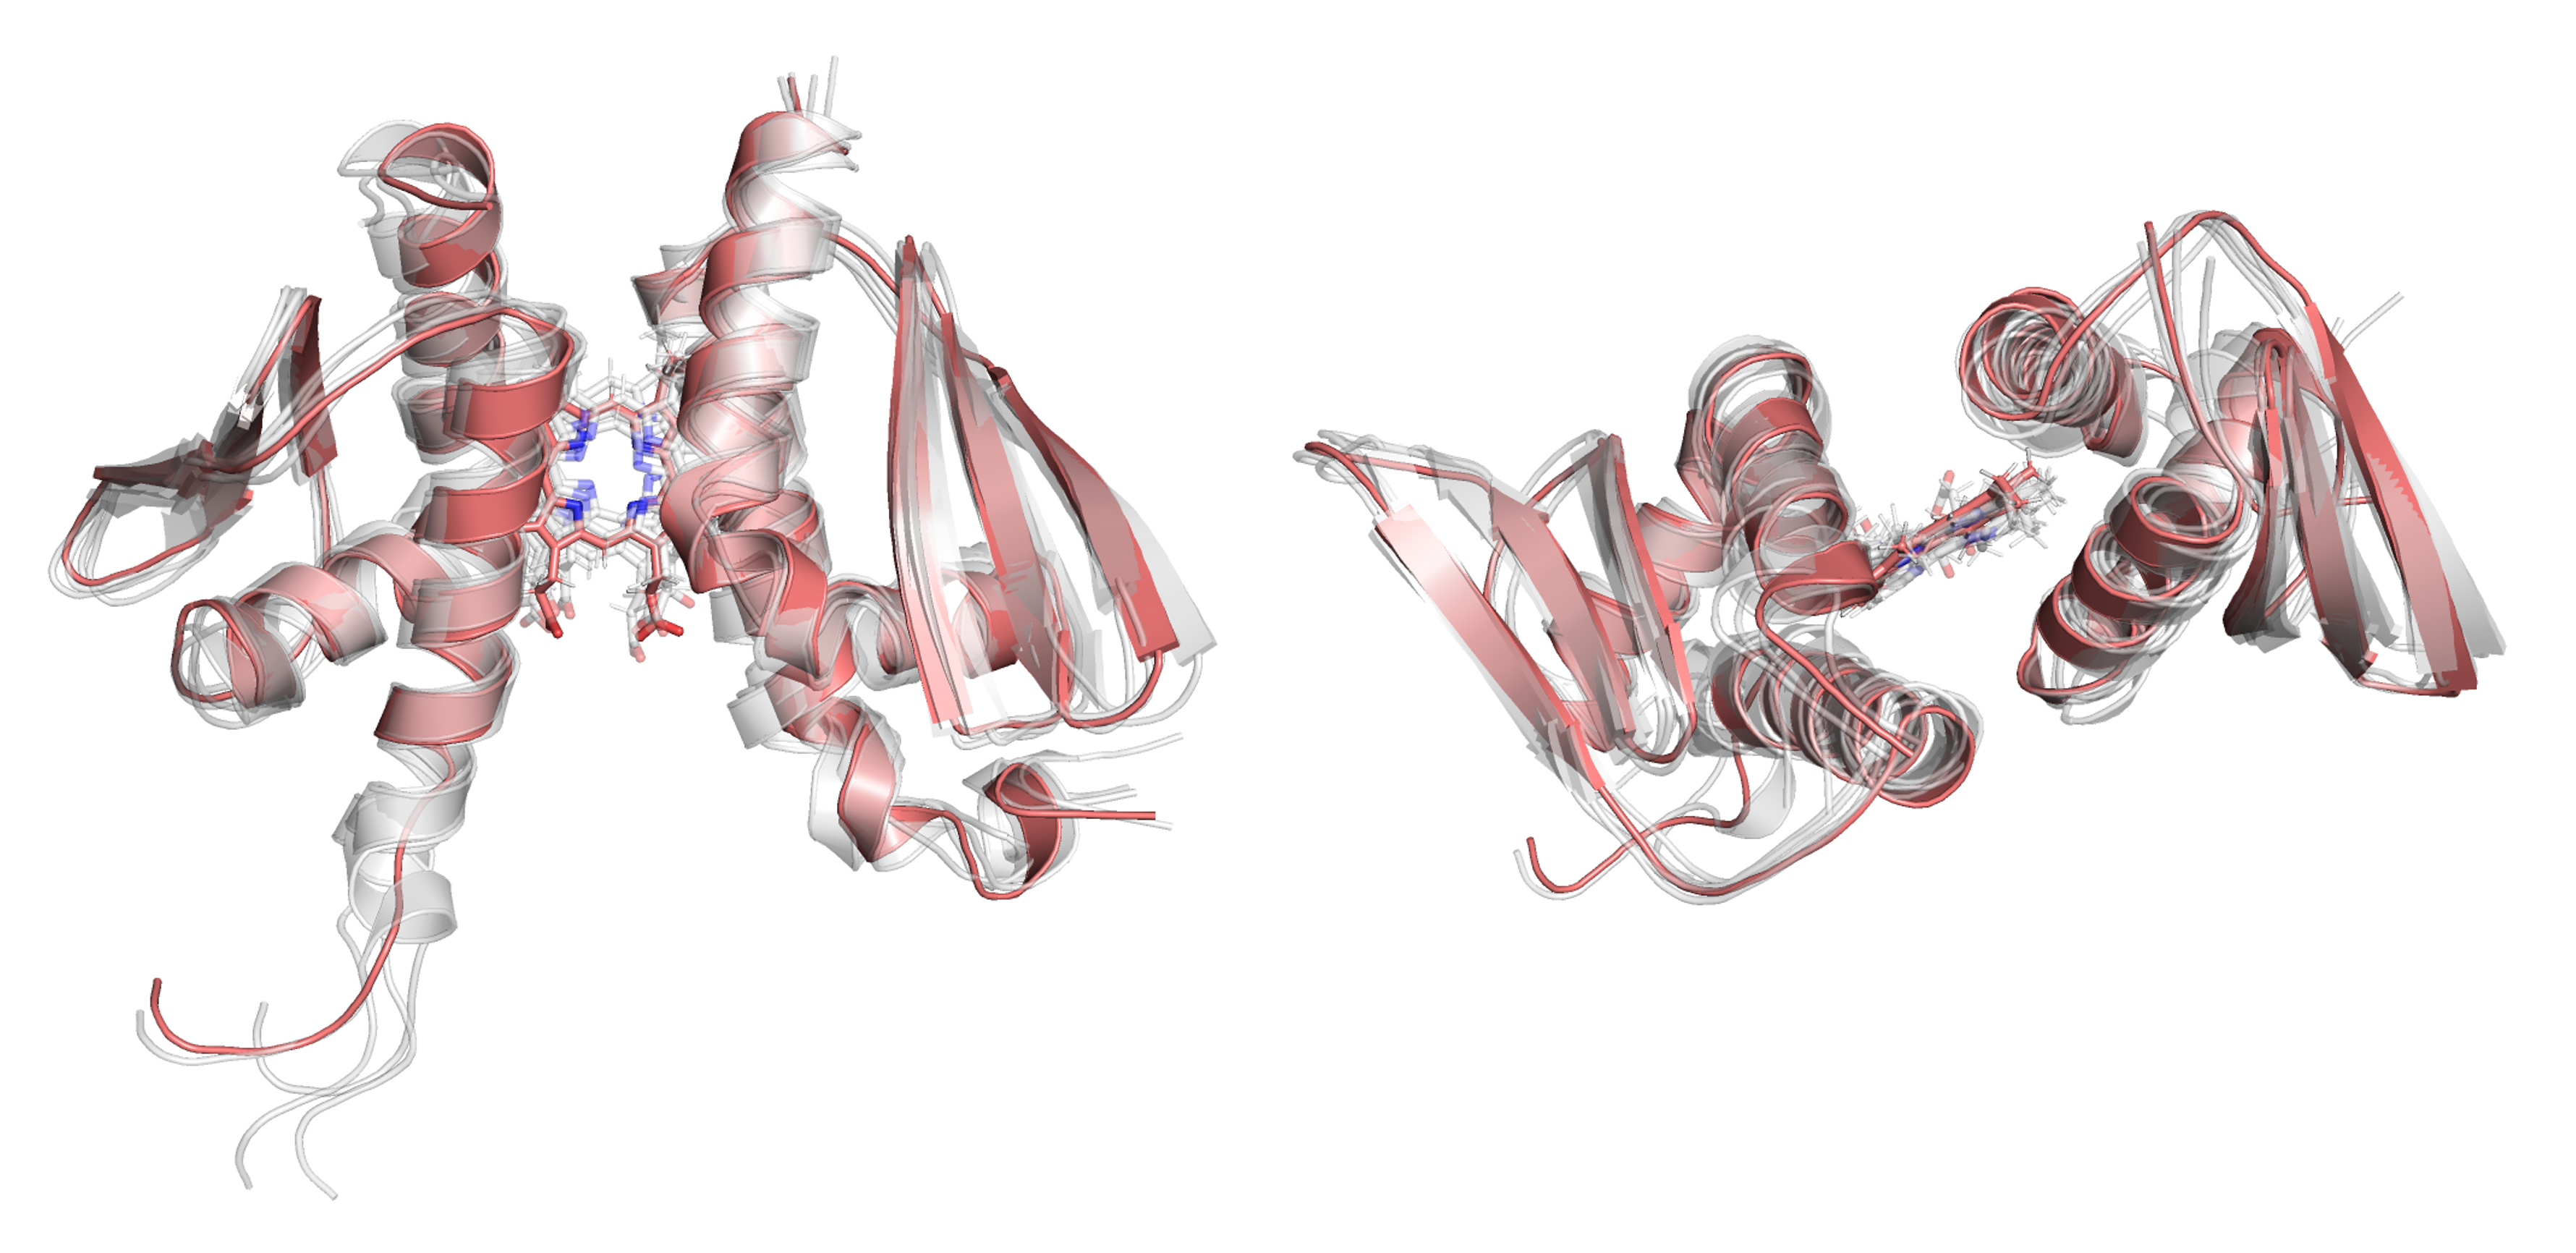 Ssr1698 protein (H21A) OTHER [STATIC IMAGE] model